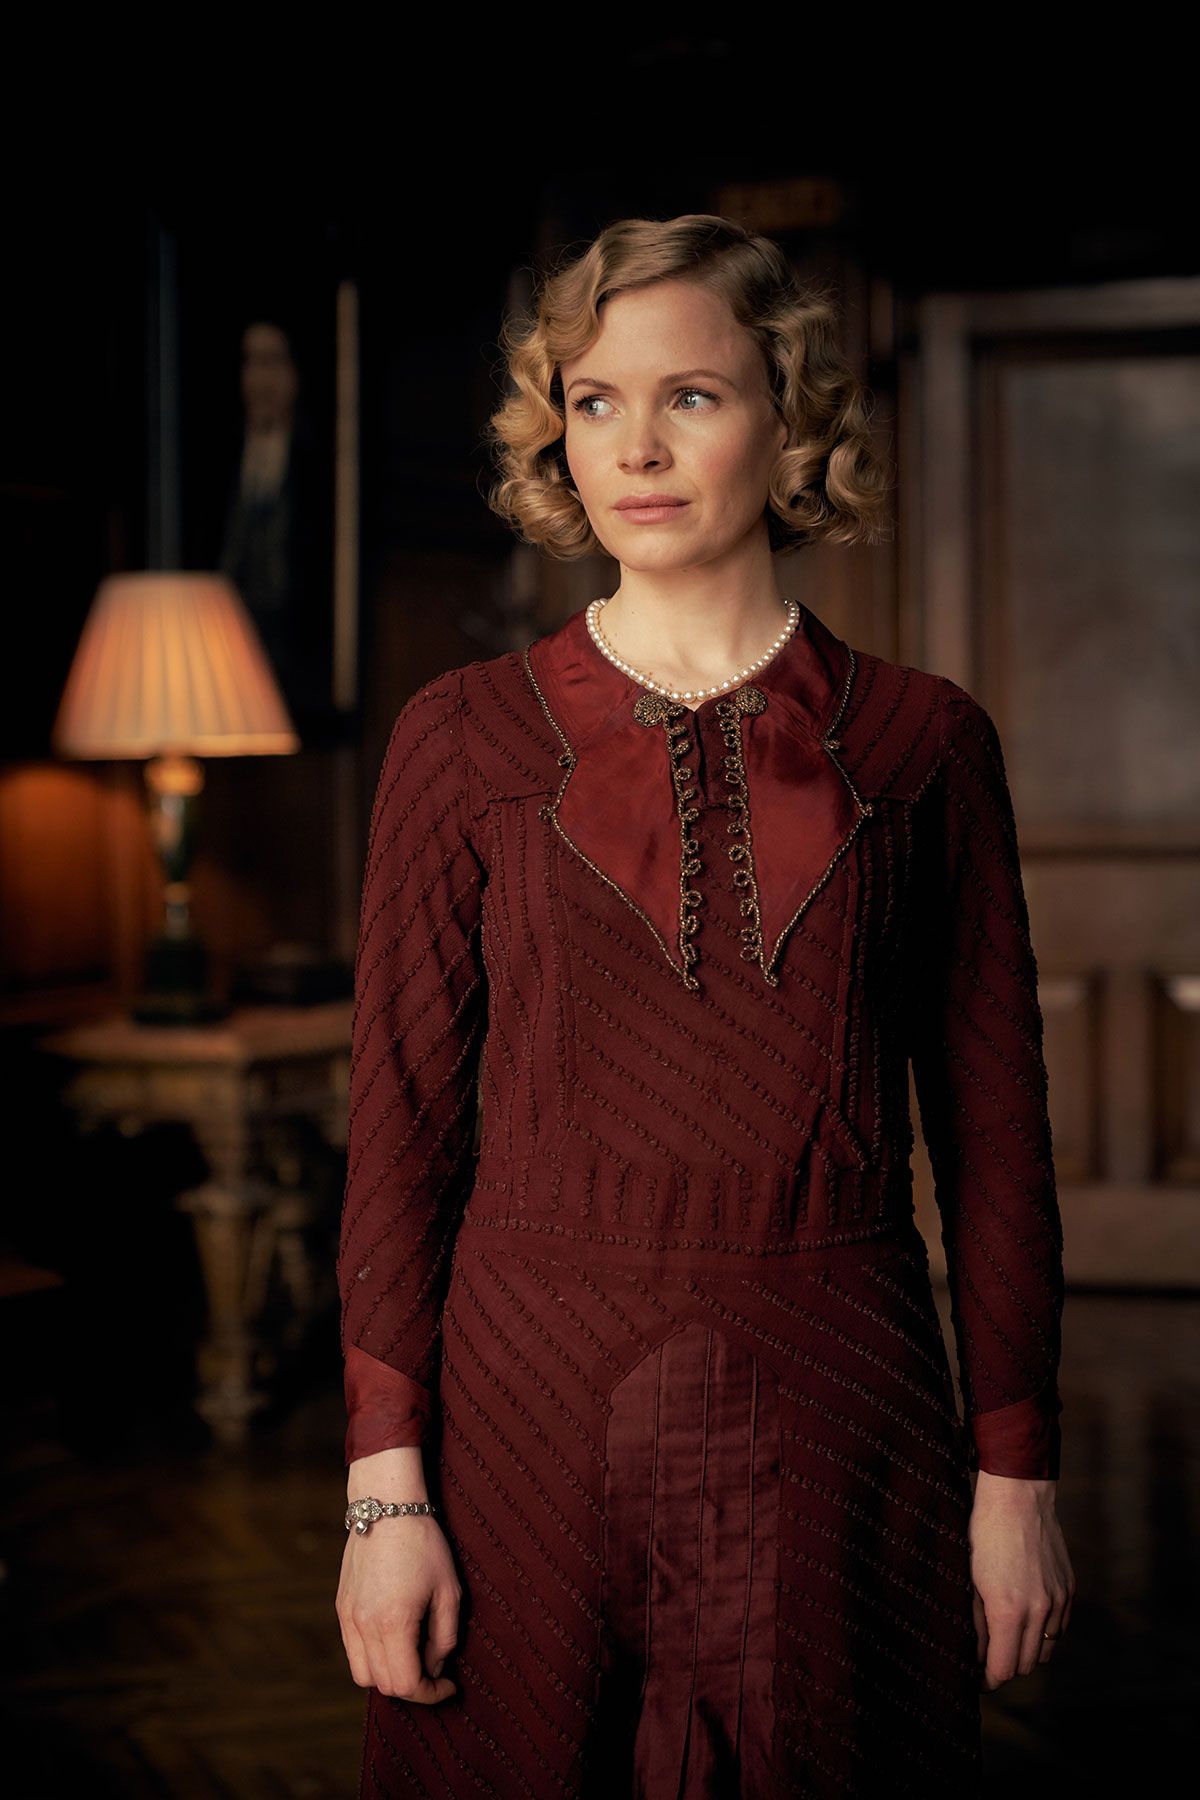 Linda - Arthur Shelby's Wife is a devout Christian, but will love from her family and being a good woman be the answer to the psychological trauma of war? Linda's appearance in season 3 gives viewers hope for the future of "mad dog" Peaky Blinders.